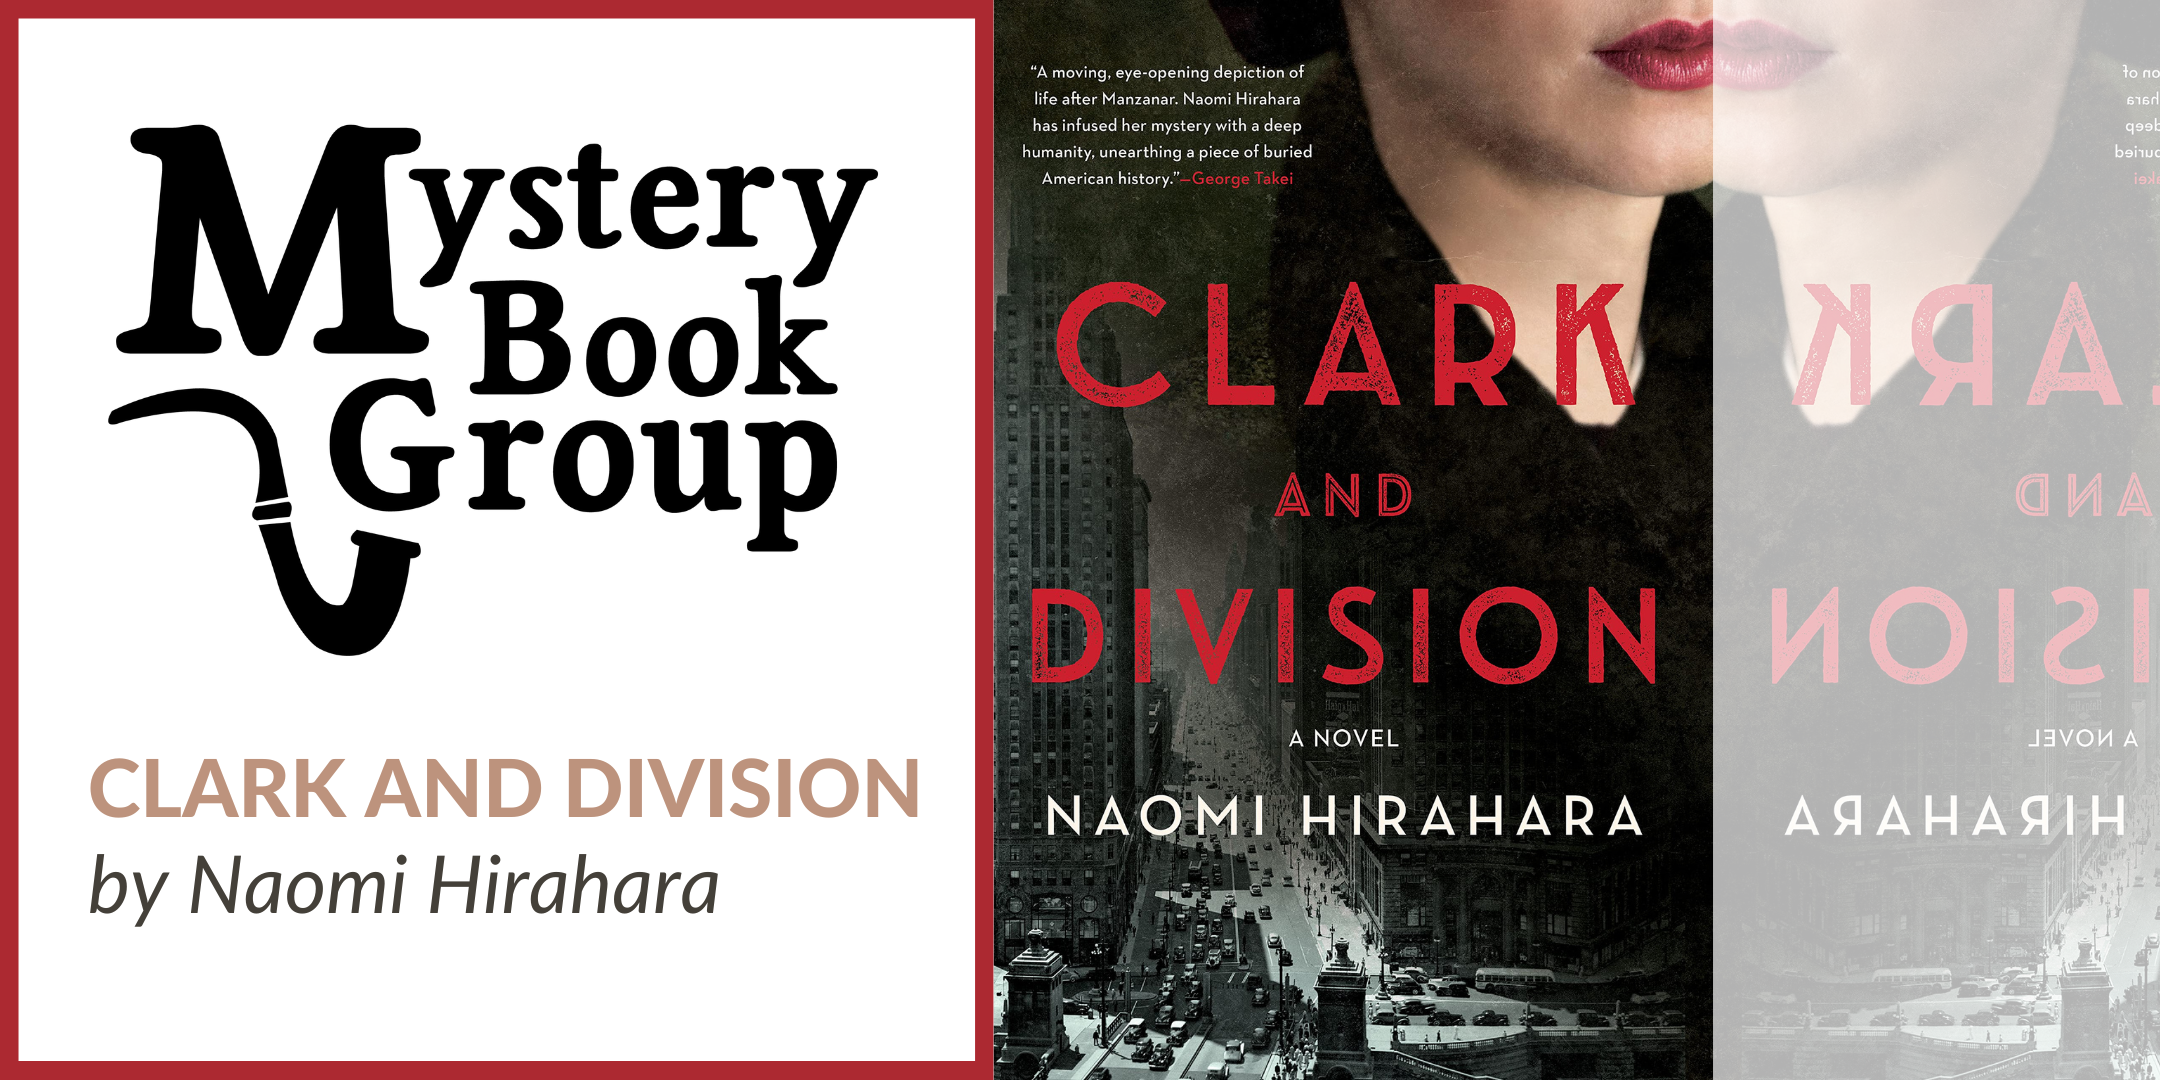 image of text stating Mystery Book Group: Clark and Division by Naomi Hirahara on the left in an outlined red box with the book cover to the right featureing a woman from the nose down in a black suit with pink red hued lips and pale skin with a cityscape in greyscale fading into the sleeve of the woman.